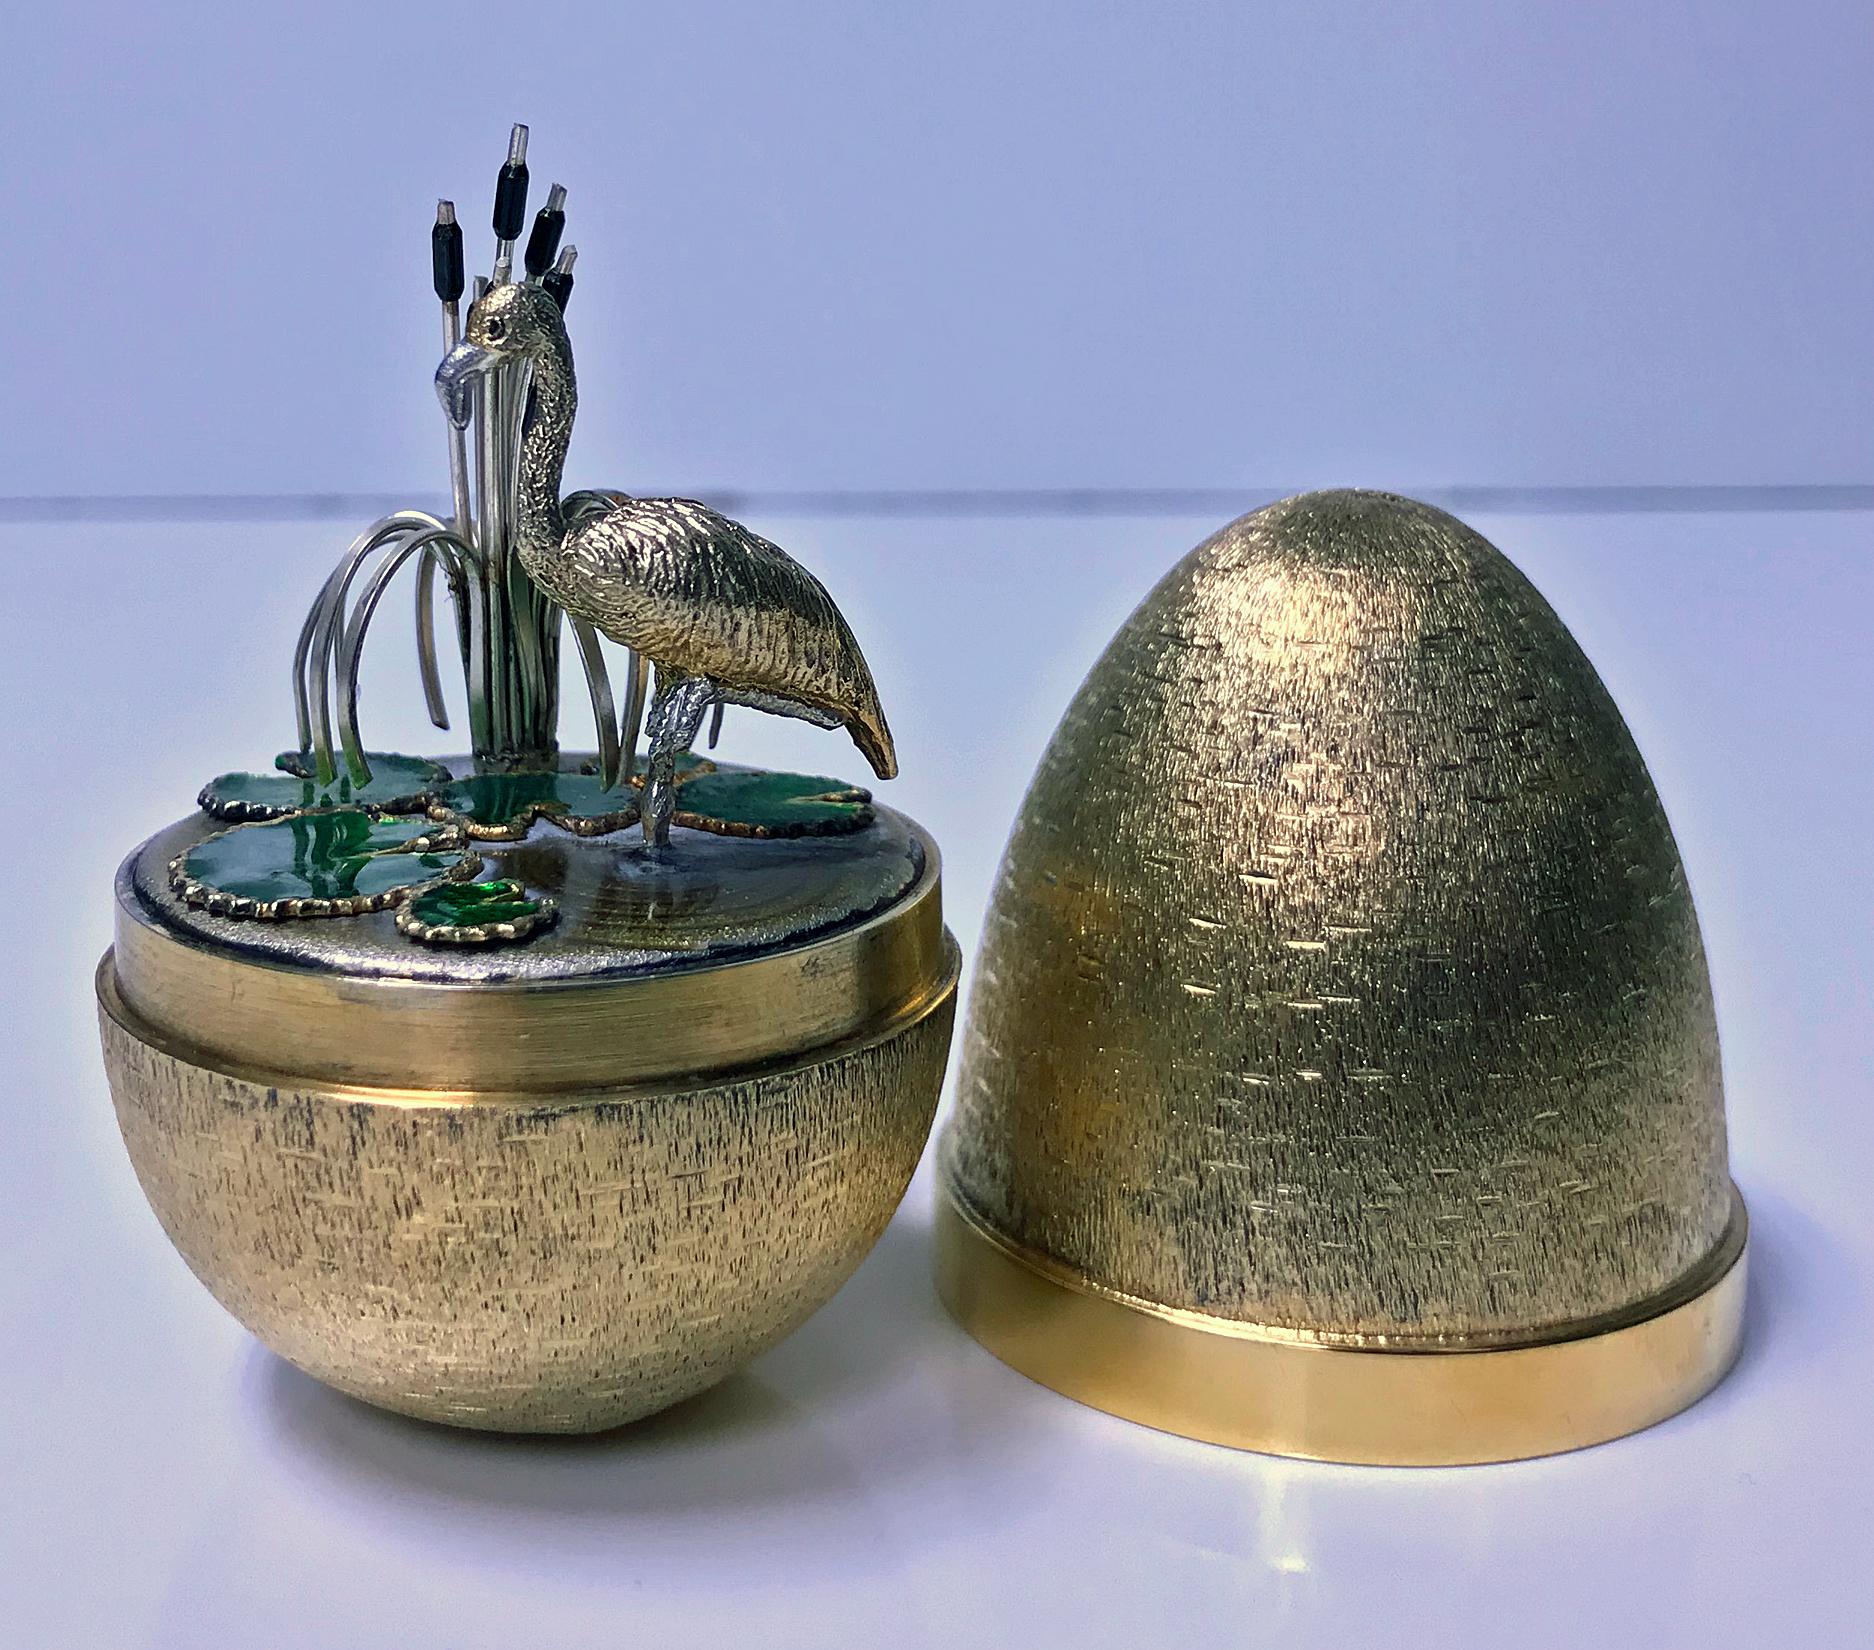 Stuart Devlin silver gilt surprise egg, London, 1983, opening to reveal a flamingo standing on a enamelled watery base with lily pads in front and bull rushes to one side. Original box and papers. Height 7.5cm high, No 19 of limited edition of 100.